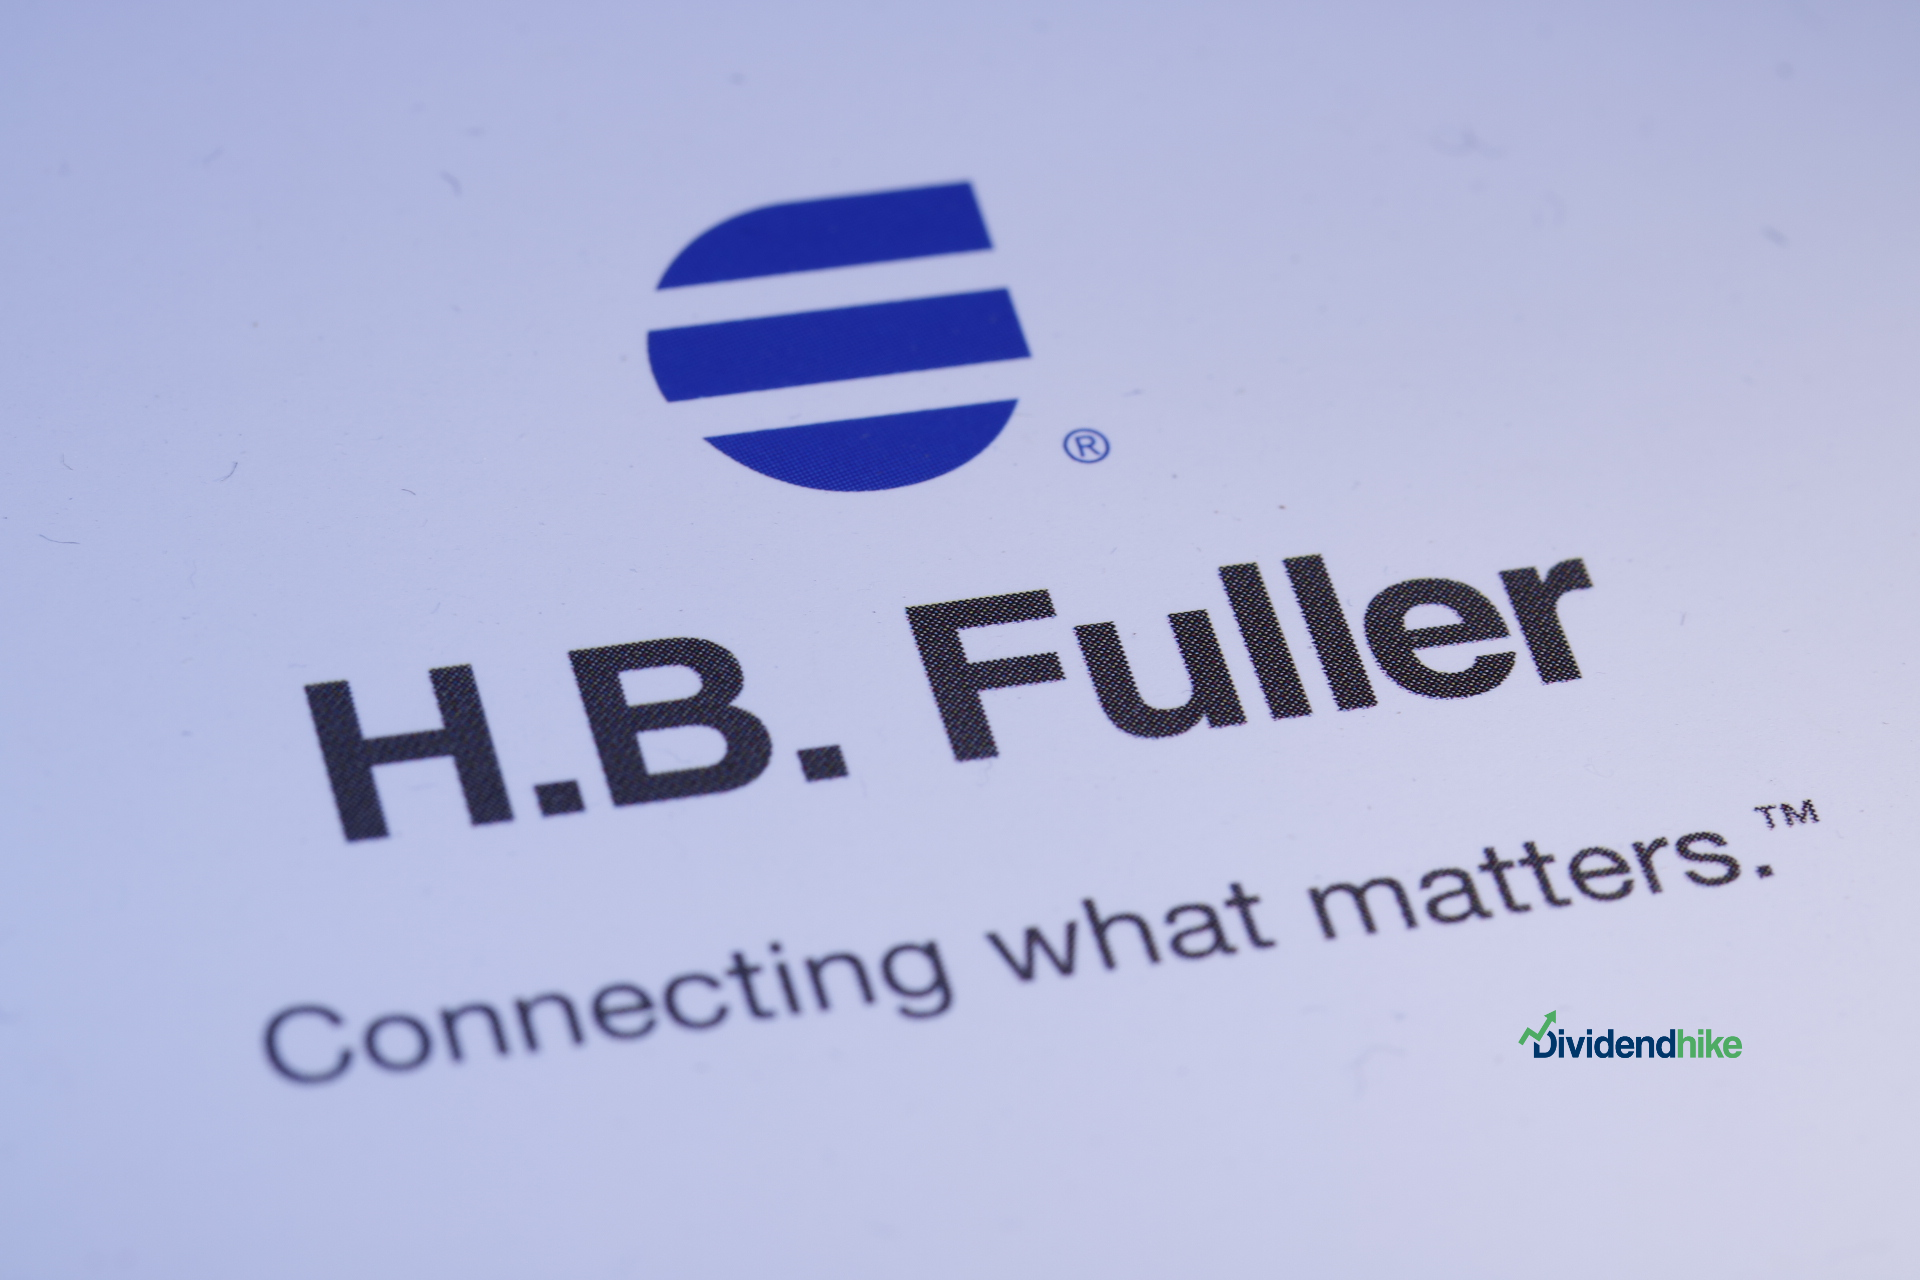 H.B. Fuller hikes dividend by 7.1%